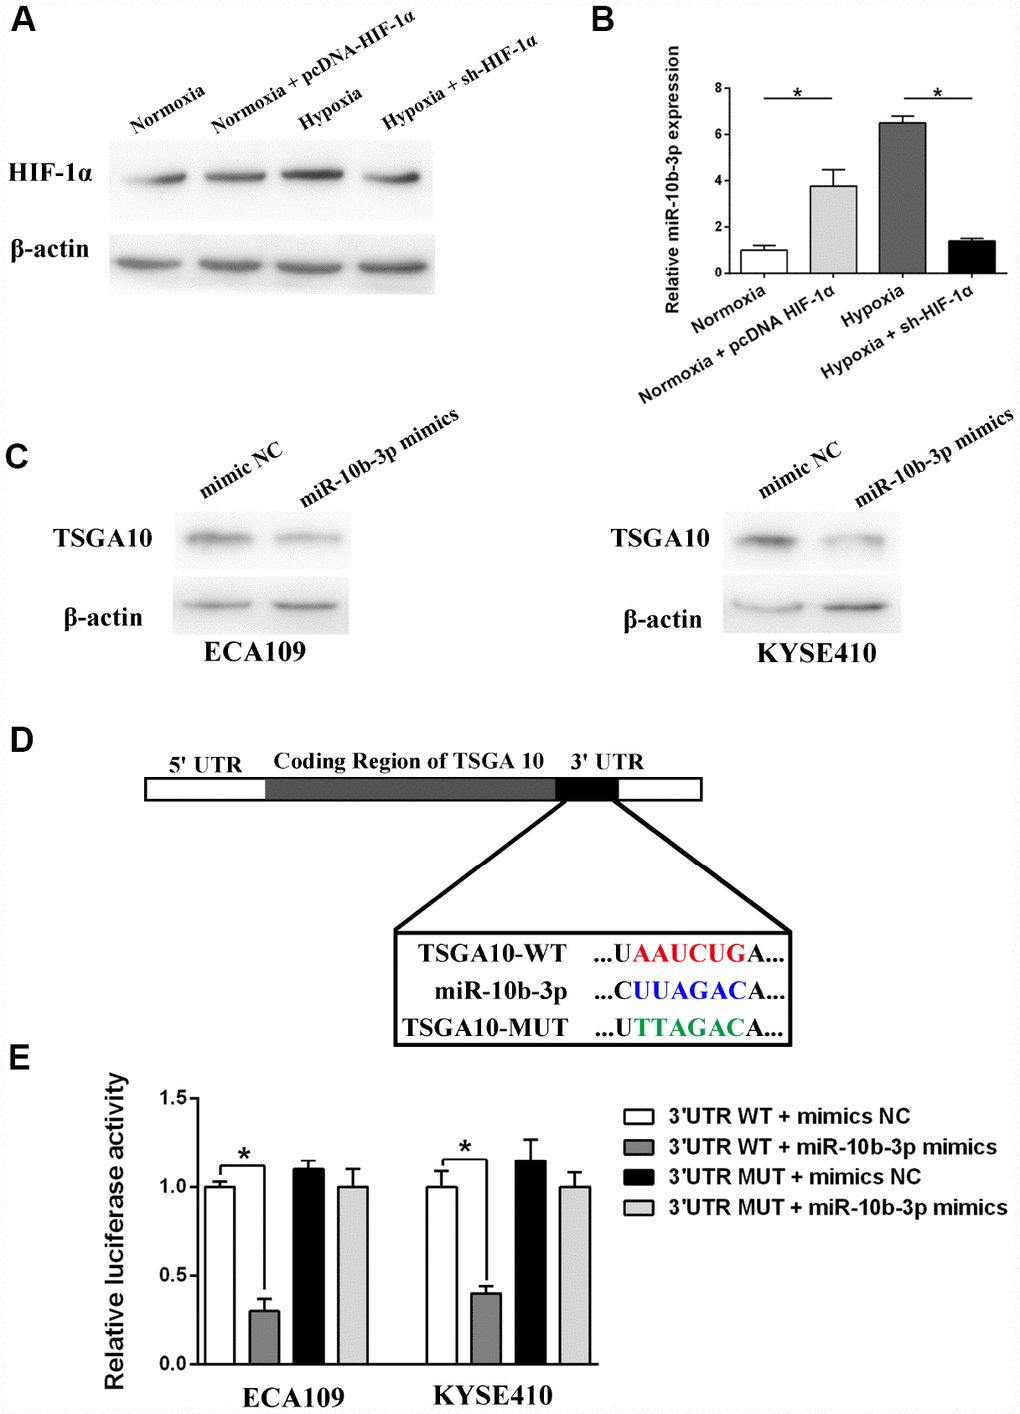 Hypoxia induced miR-10b-3p expression and its target validation. ECA109 cells transfected with sh-HIF-1α or pcDNA- HIF-1α were incubated for 48 hours under normoxic or hypoxic conditions. (A) Western blotting showed HIF-1α expression. (B) Quantification of miR-10b-3p expression using qRT-PCR. (C) ECA109 and KYSE410 cells were transfected with miR-10b-3p mimics or mimics NC, after which TSGA10 expression was assessed by western blotting. (D) Predicted miR-10b-3p wild-type binding sites (WT) or mutant binding sites (MUT) were cloned into a luciferase reporter. Cells co-transfected with miR-10b-3p mimics or controls and WT or MUT luciferase constructs were subjected to luciferase assay. (E) Measurement of luciferase activity. *P 